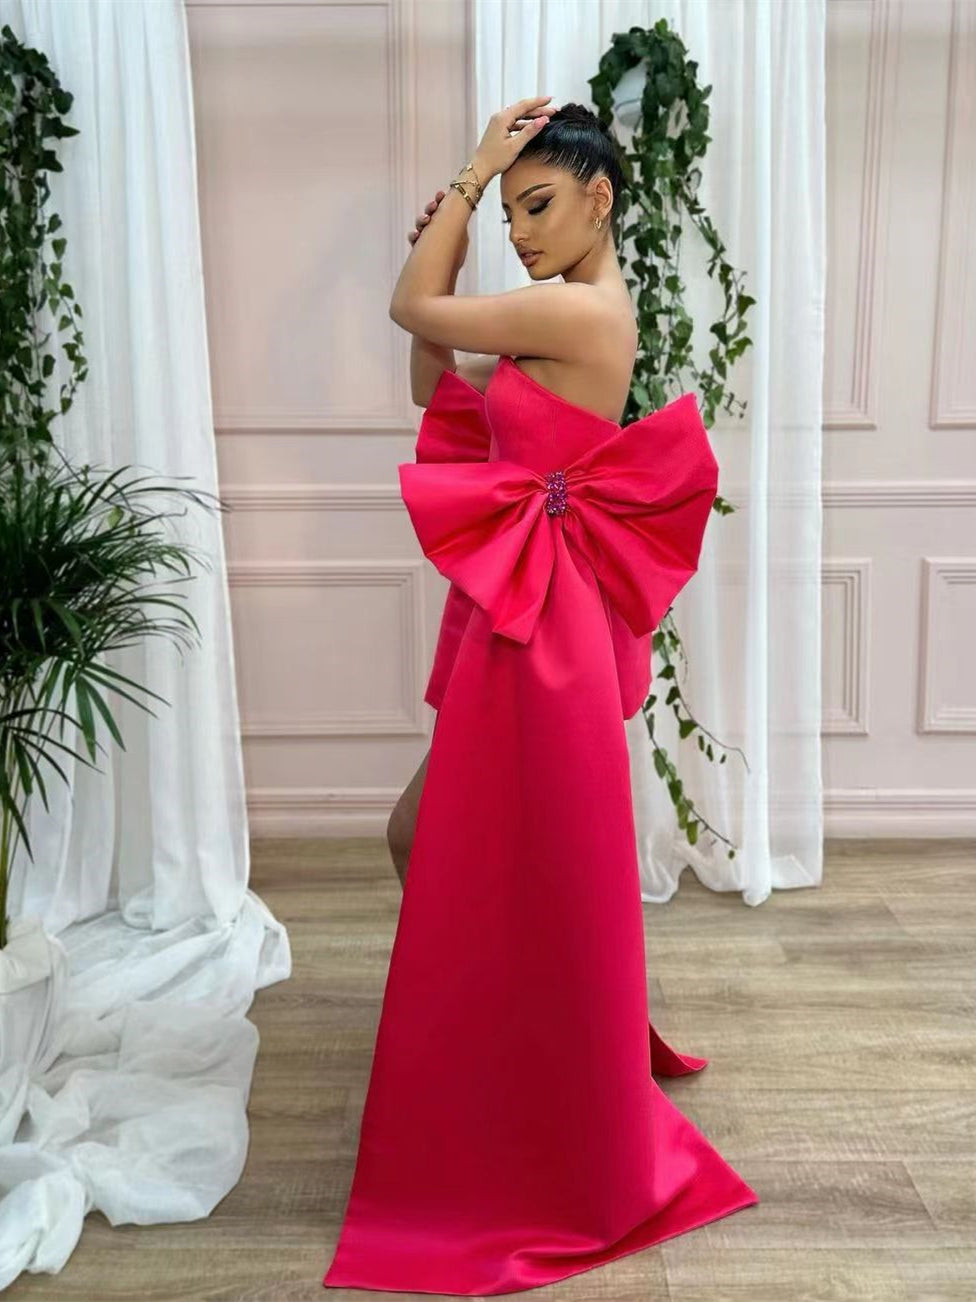 Cute Hot Pink Satin Prom Dresses With Detachable Bows, Popular Prom Dresses, 2023 Prom Dresses